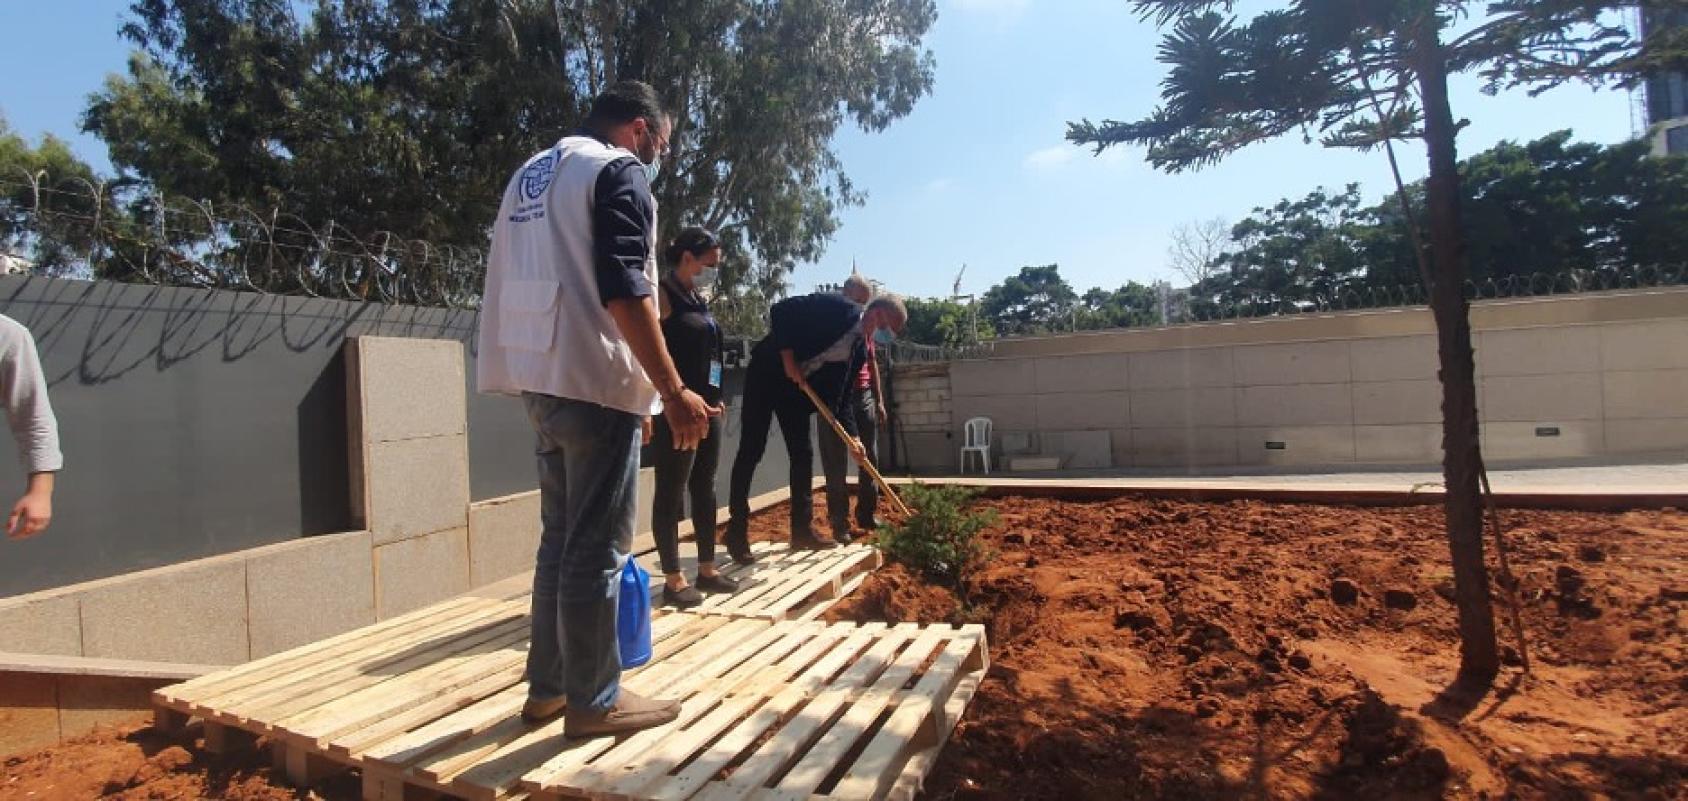 UN Staff are shown planting a tree in remembrance of the one year after the explosion